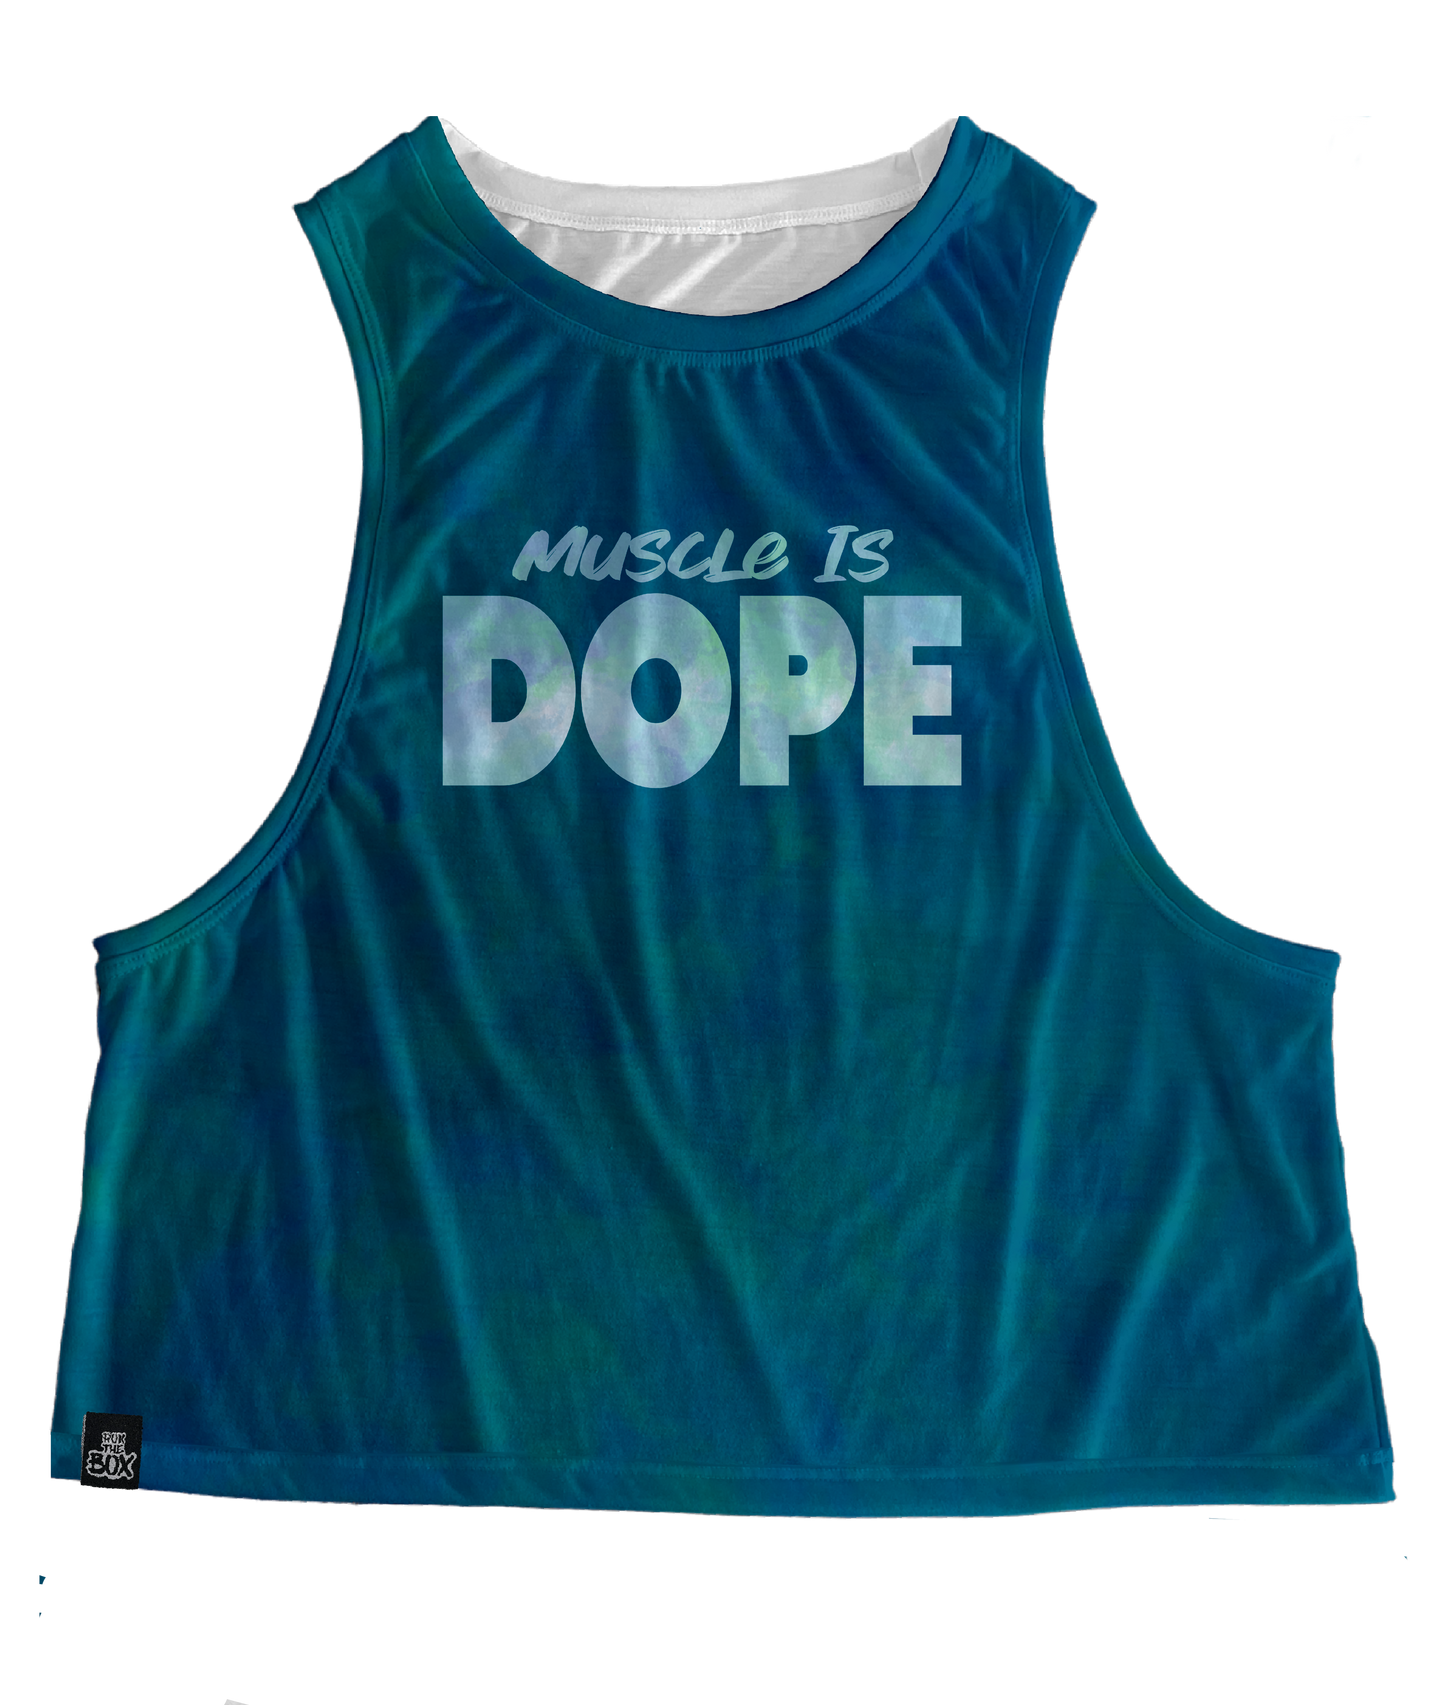 Muscle Teal Tops